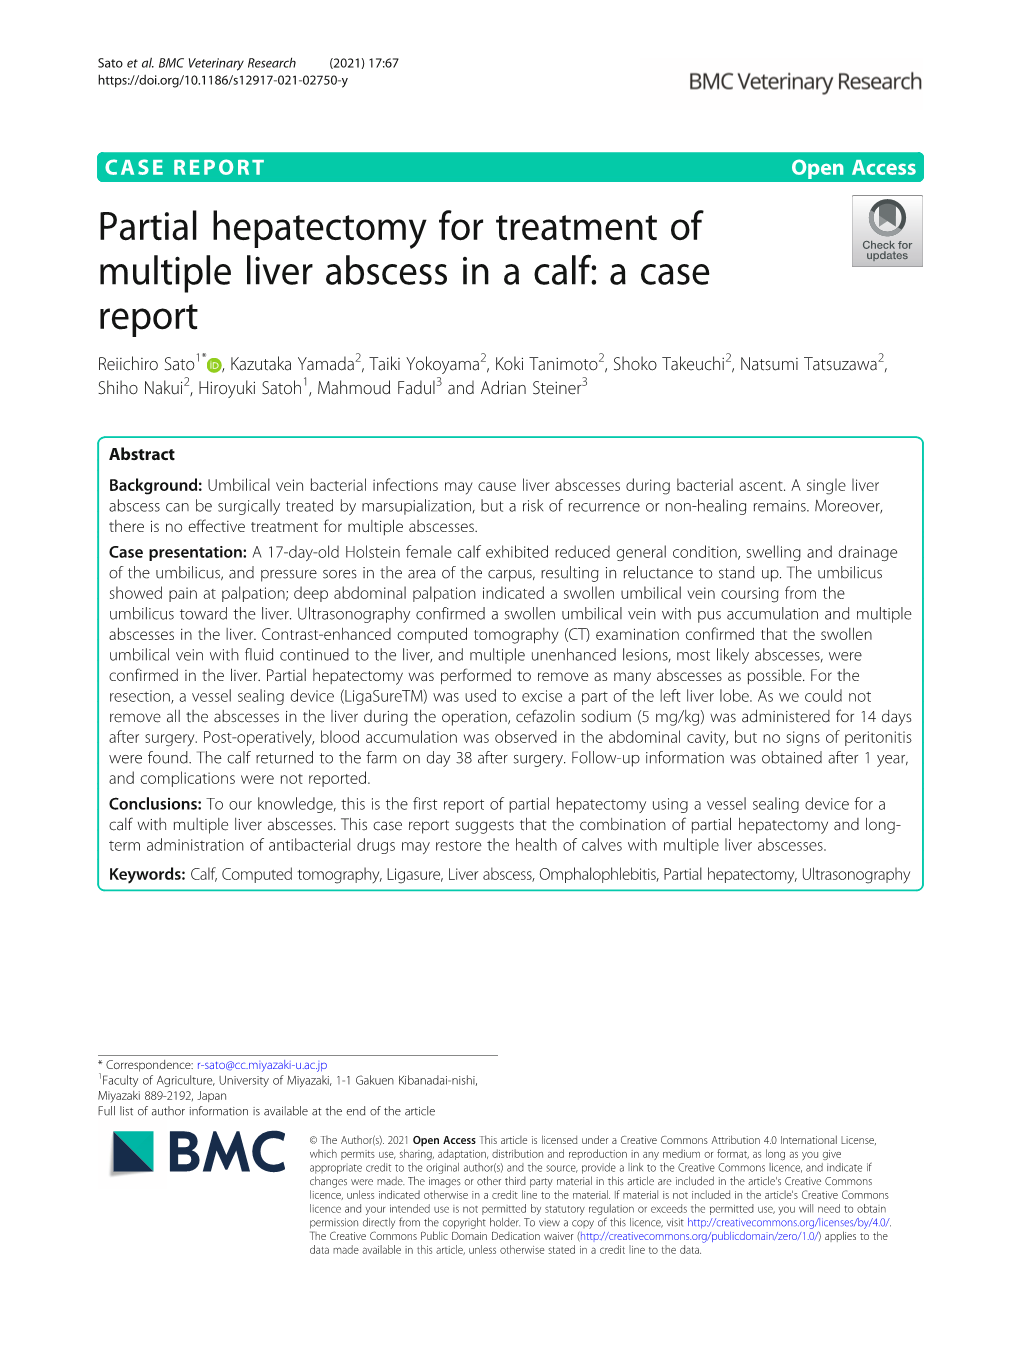 Partial Hepatectomy for Treatment of Multiple